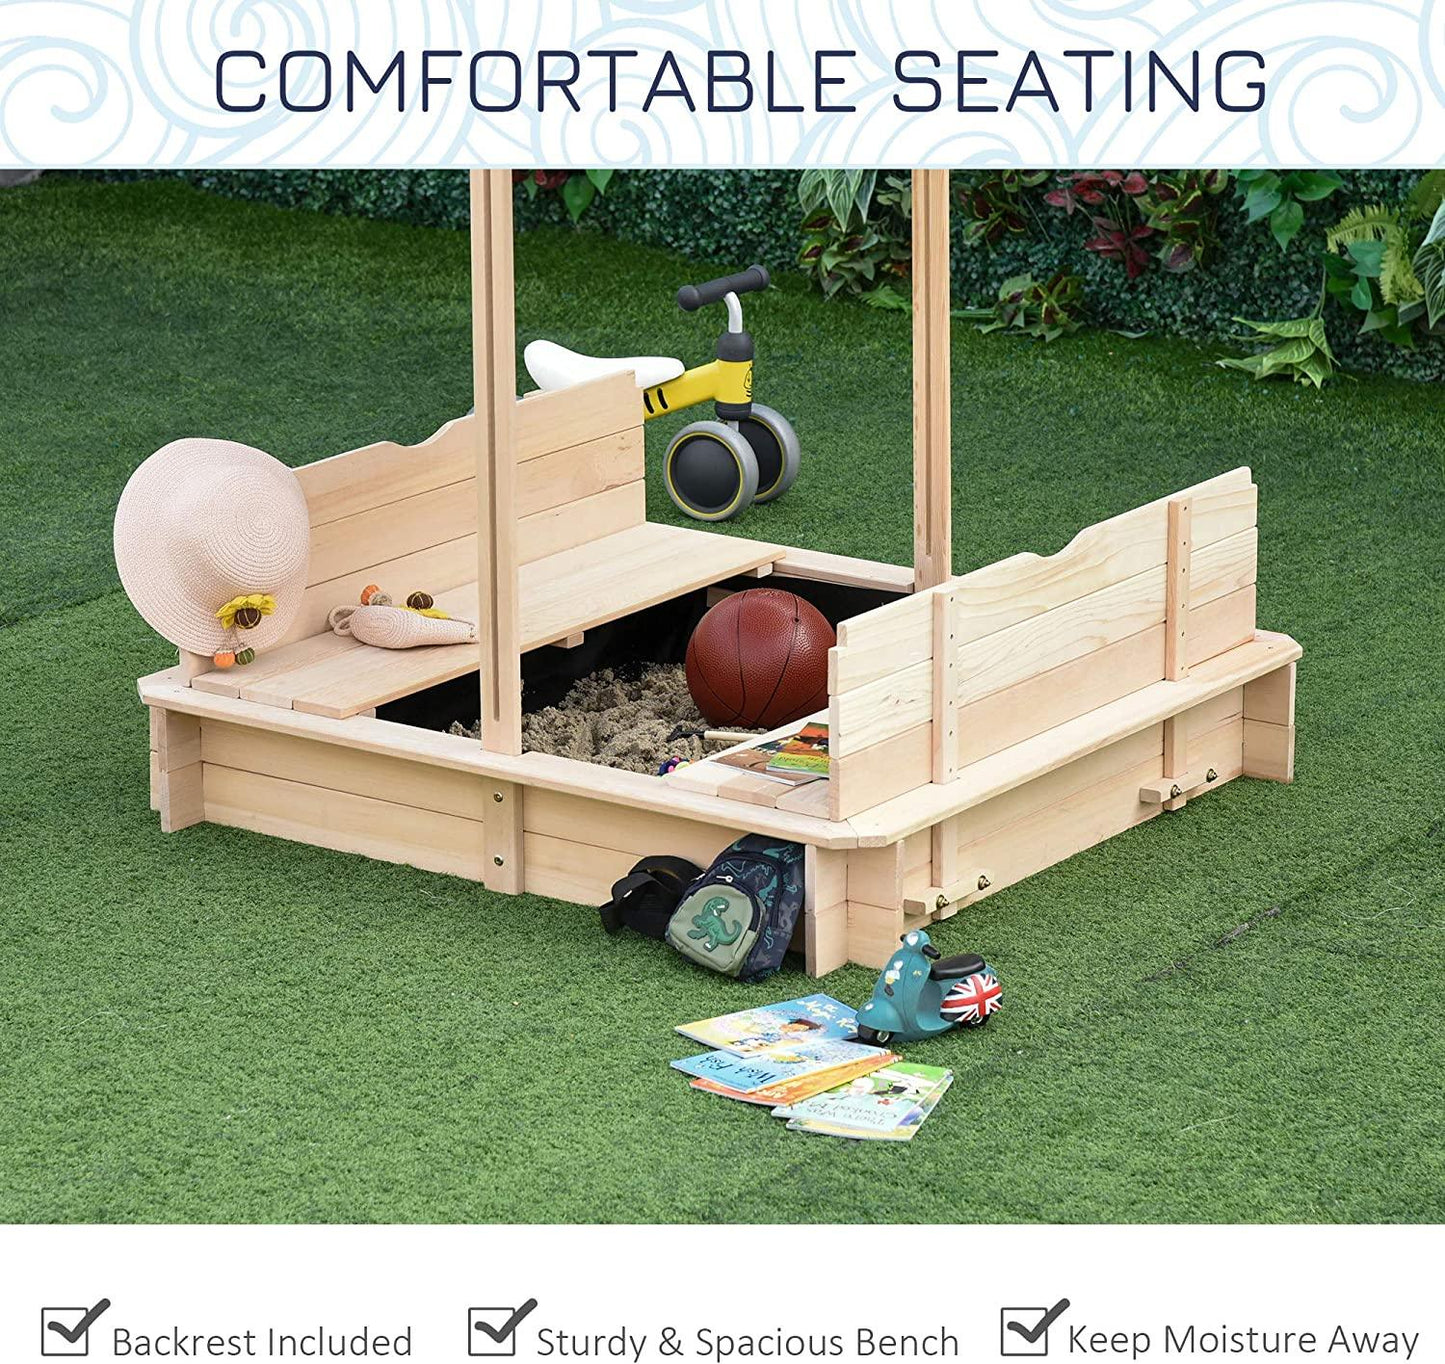 Kids Wooden Sandbox with Adjustable Canopy & Foldable Bench Seats - TheGivenGet